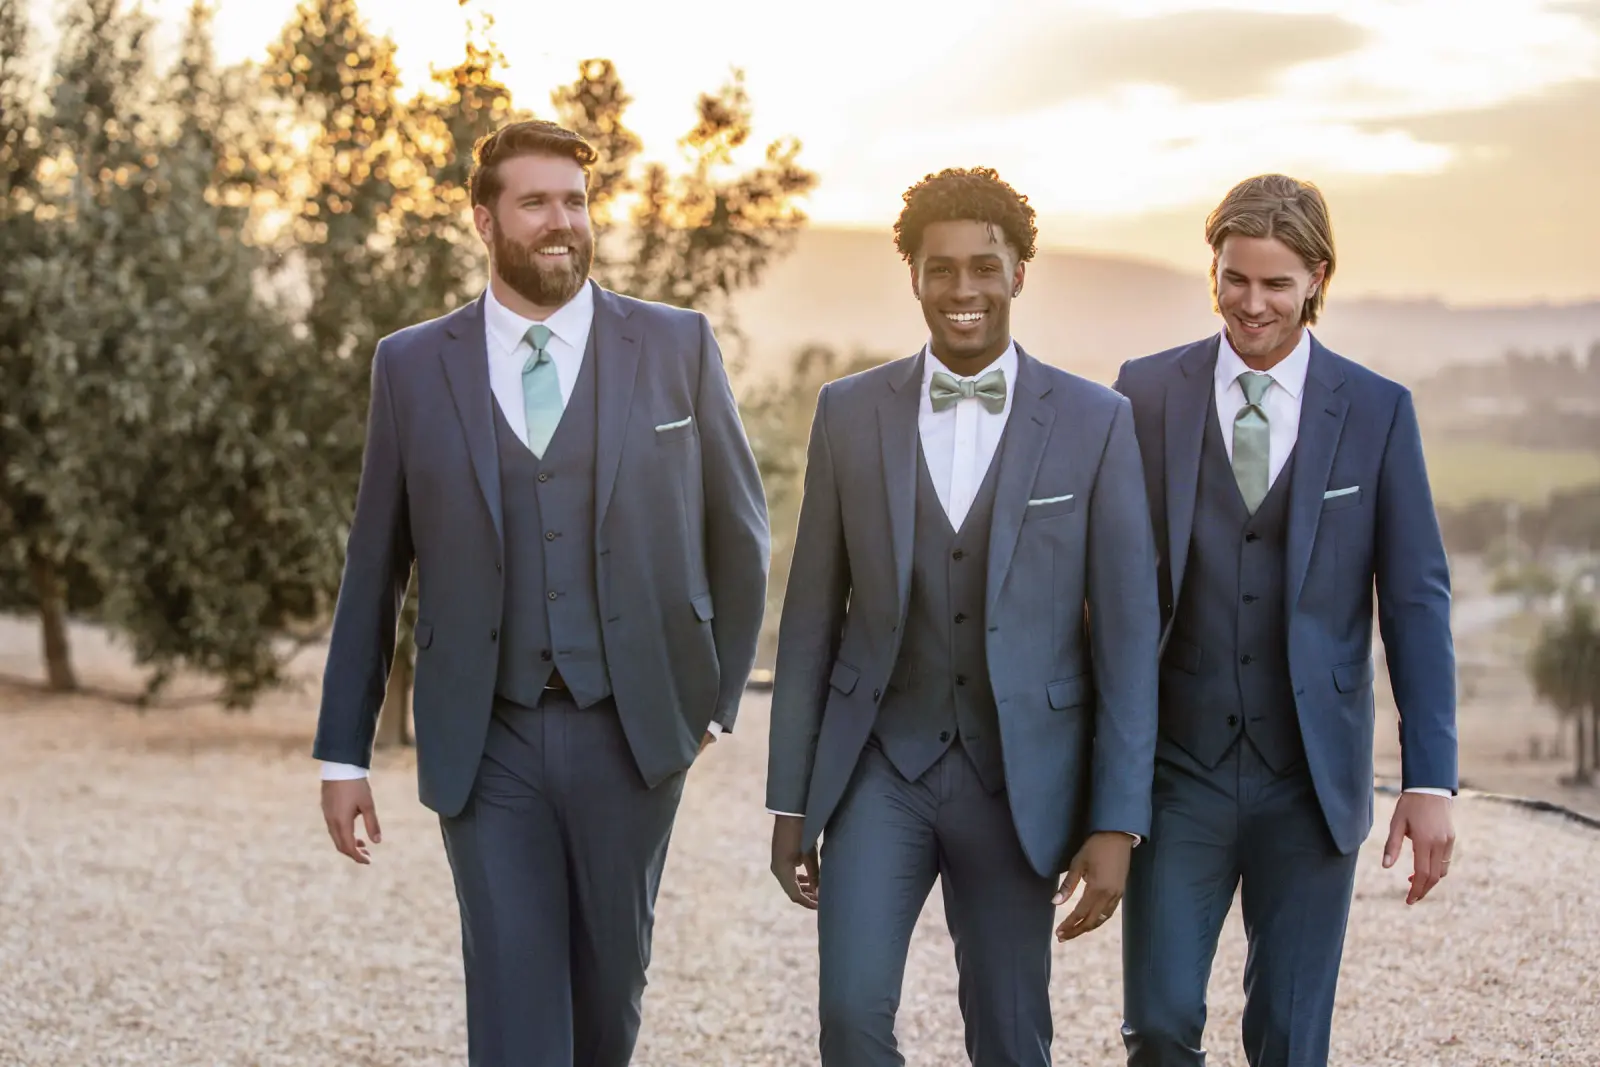 Wedding Suits and Tuxedos, Bridal Suits